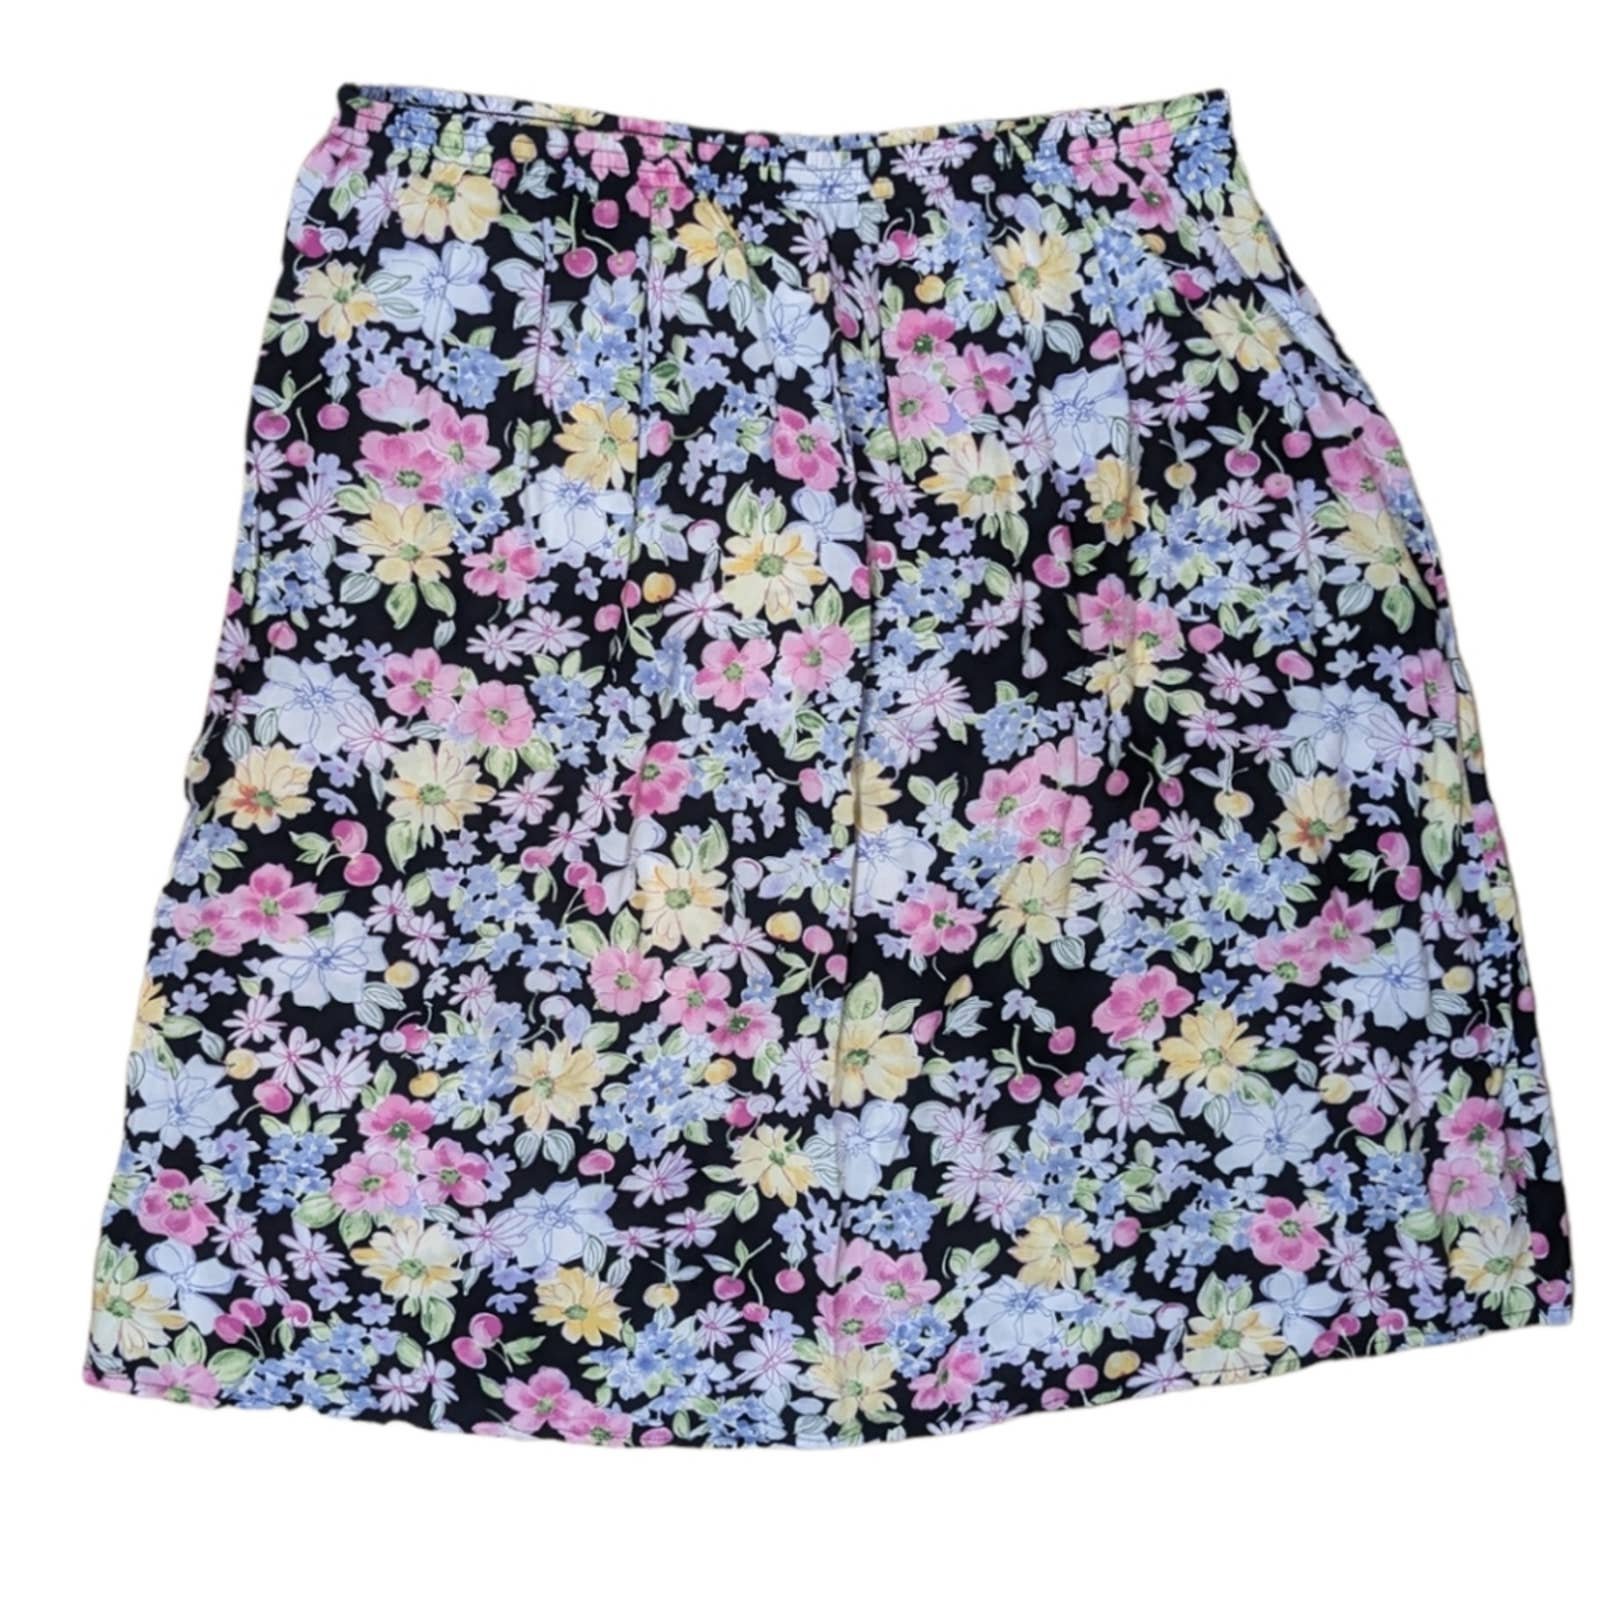 Wholesale price 90s floral midi skirt with elastic waist oXIwtnf5K Great